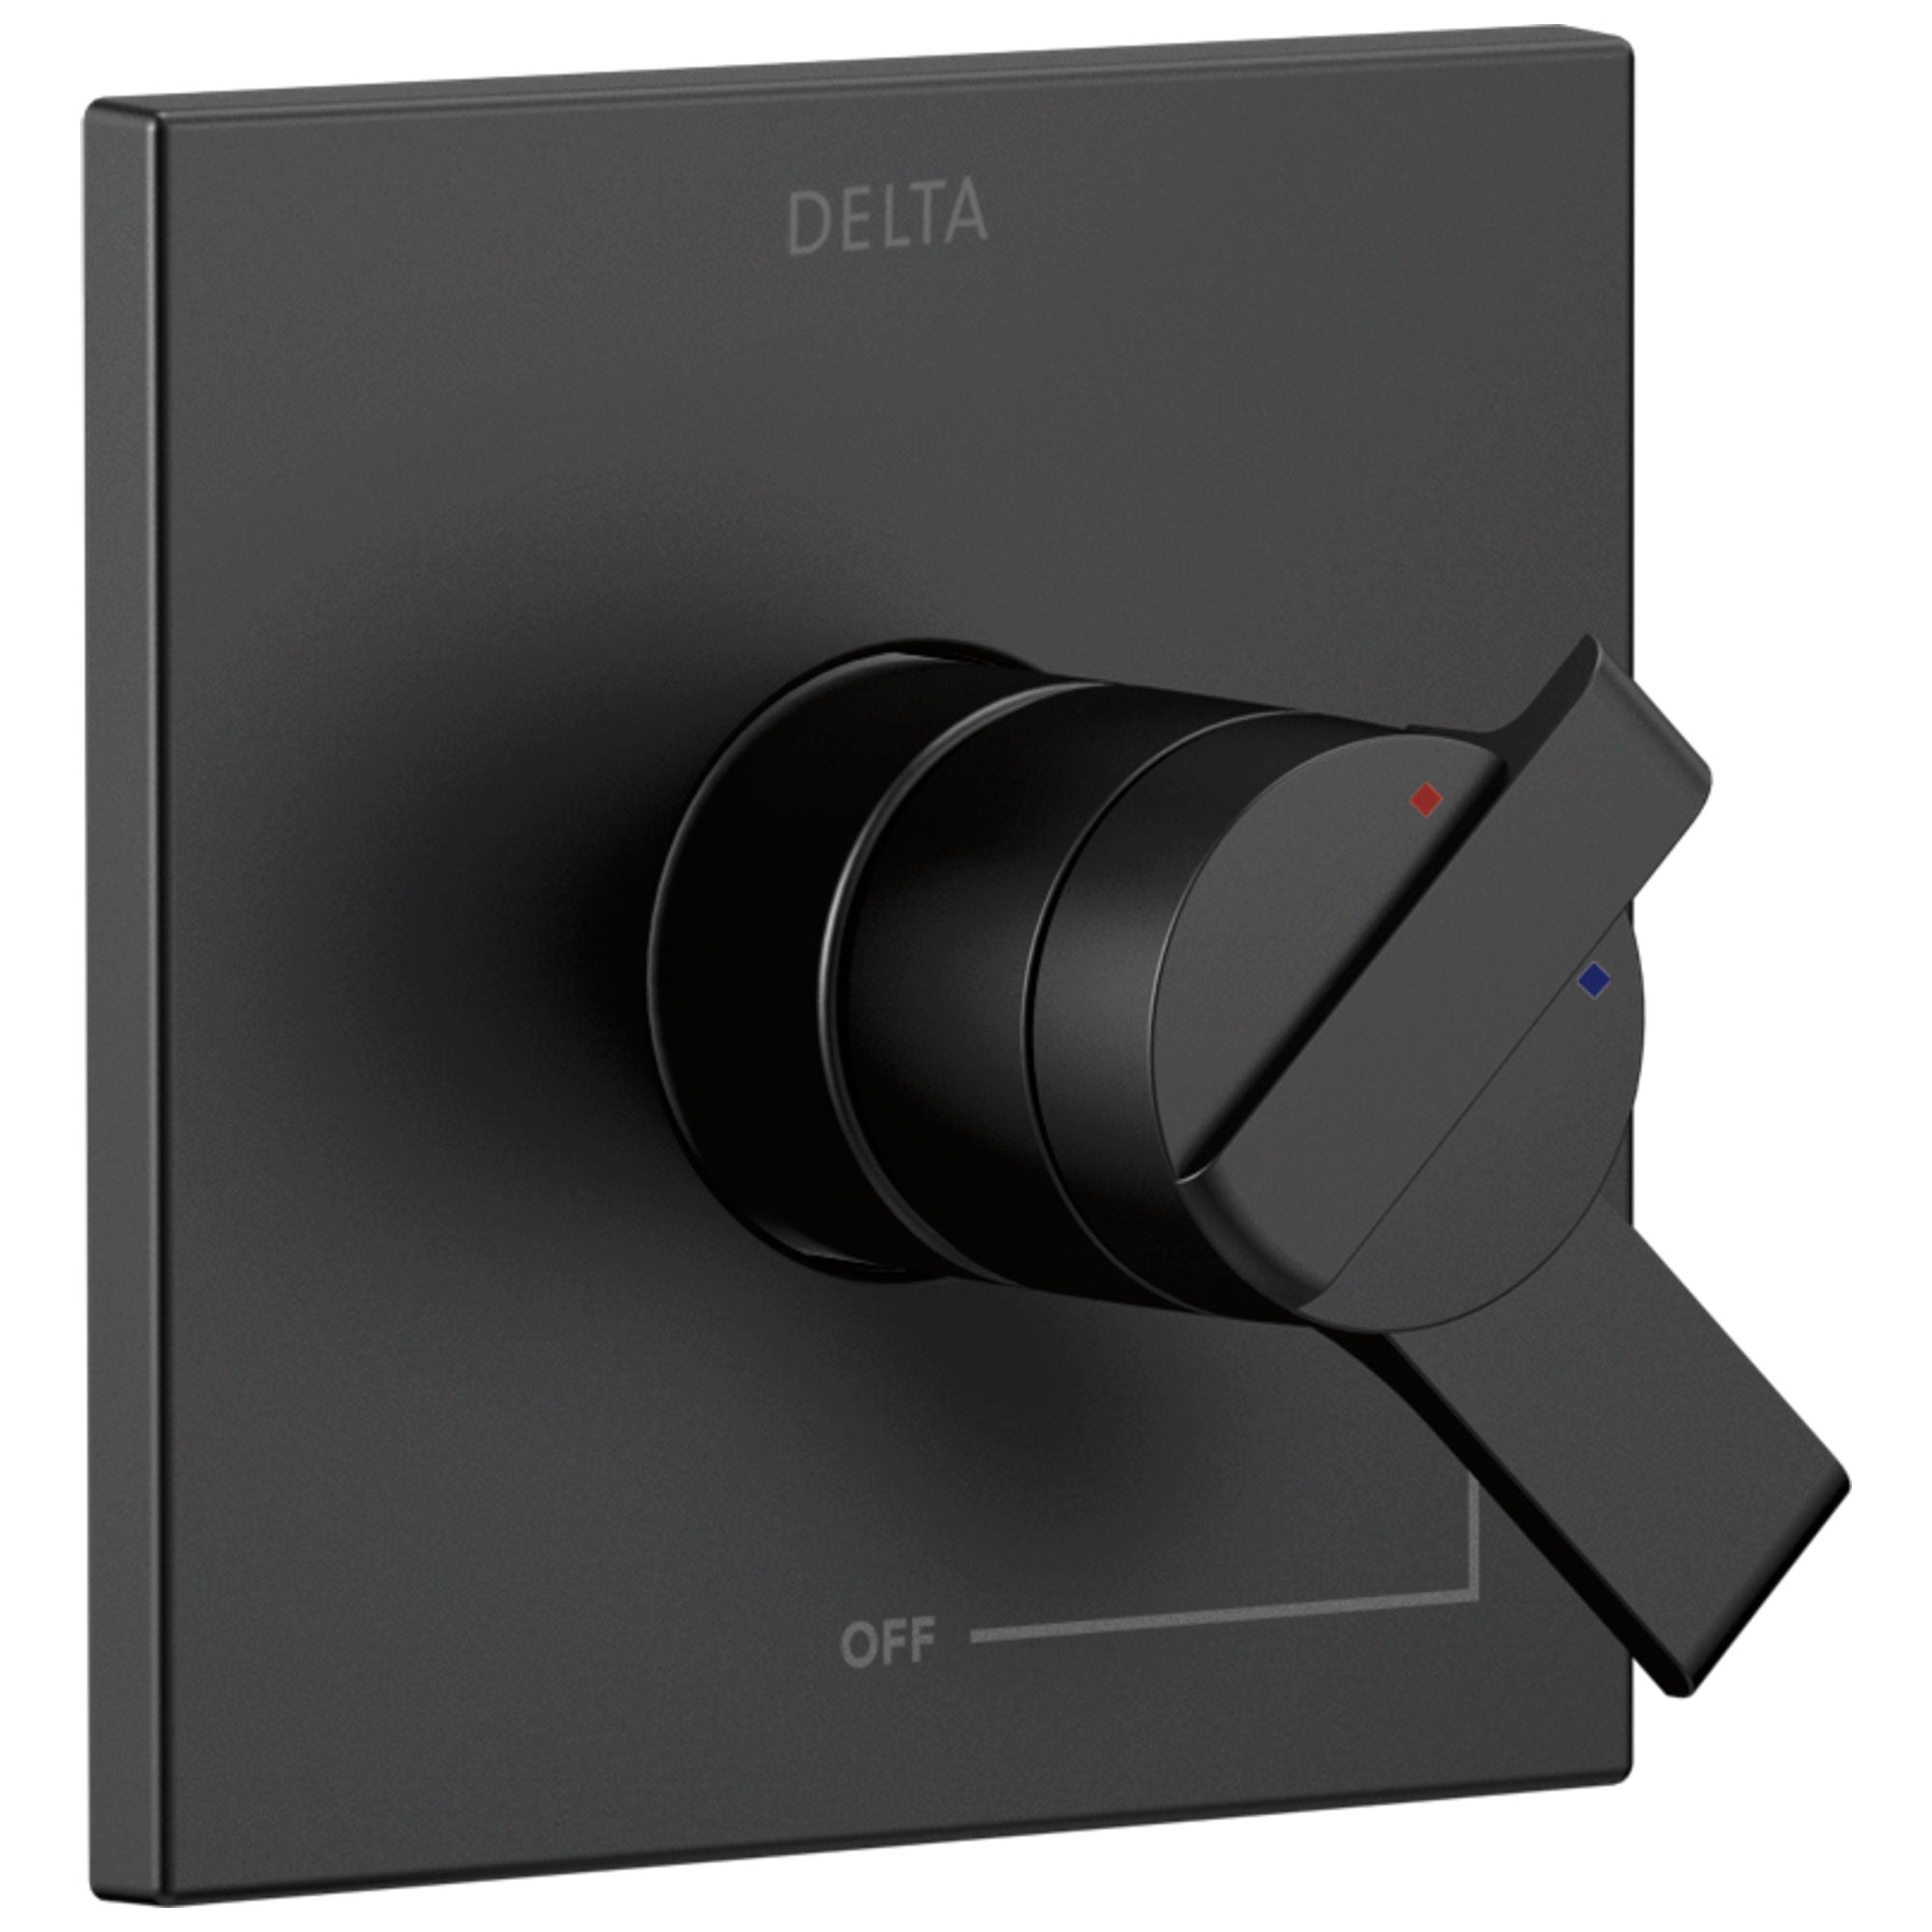 Delta Ara Collection Matte Black Finish Square Shower Faucet Valve Only Trim with Dual Temperature and Pressure Controls (Requires Valve) DT17067BL